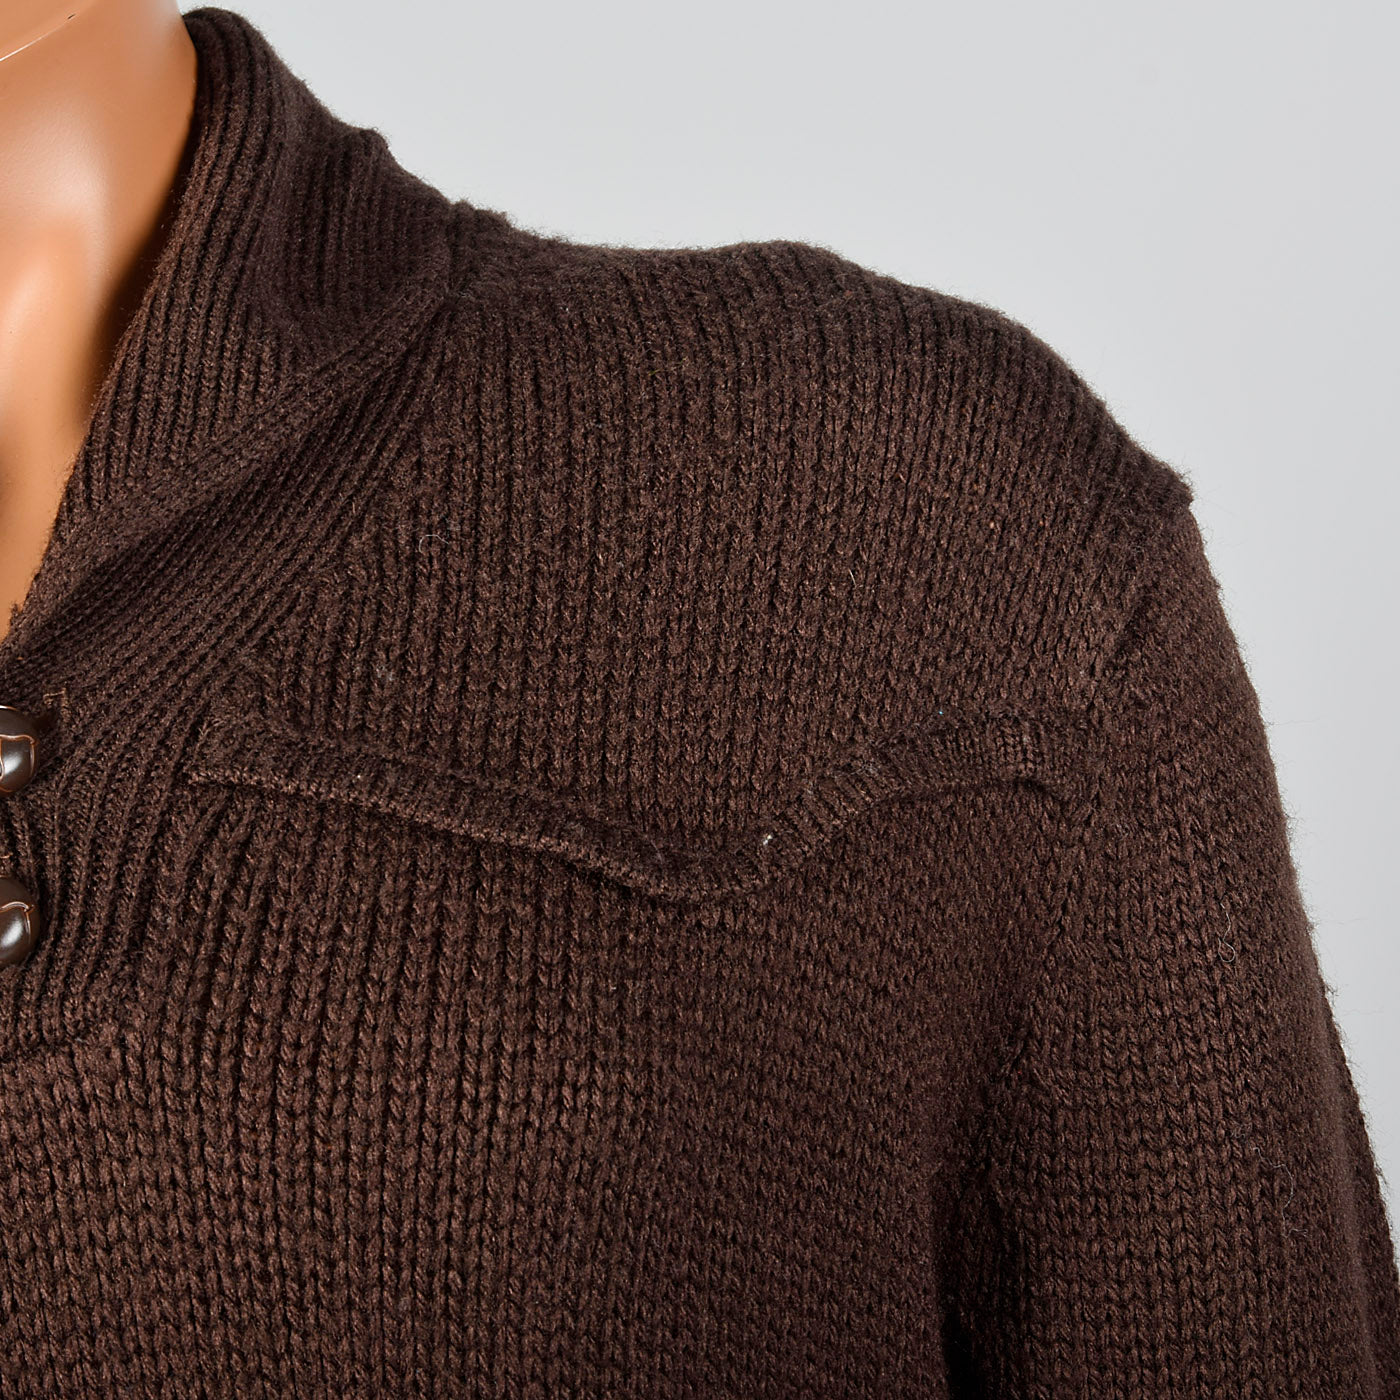 1970s Mens Soft Brown Sweater with Shoulder Yoke